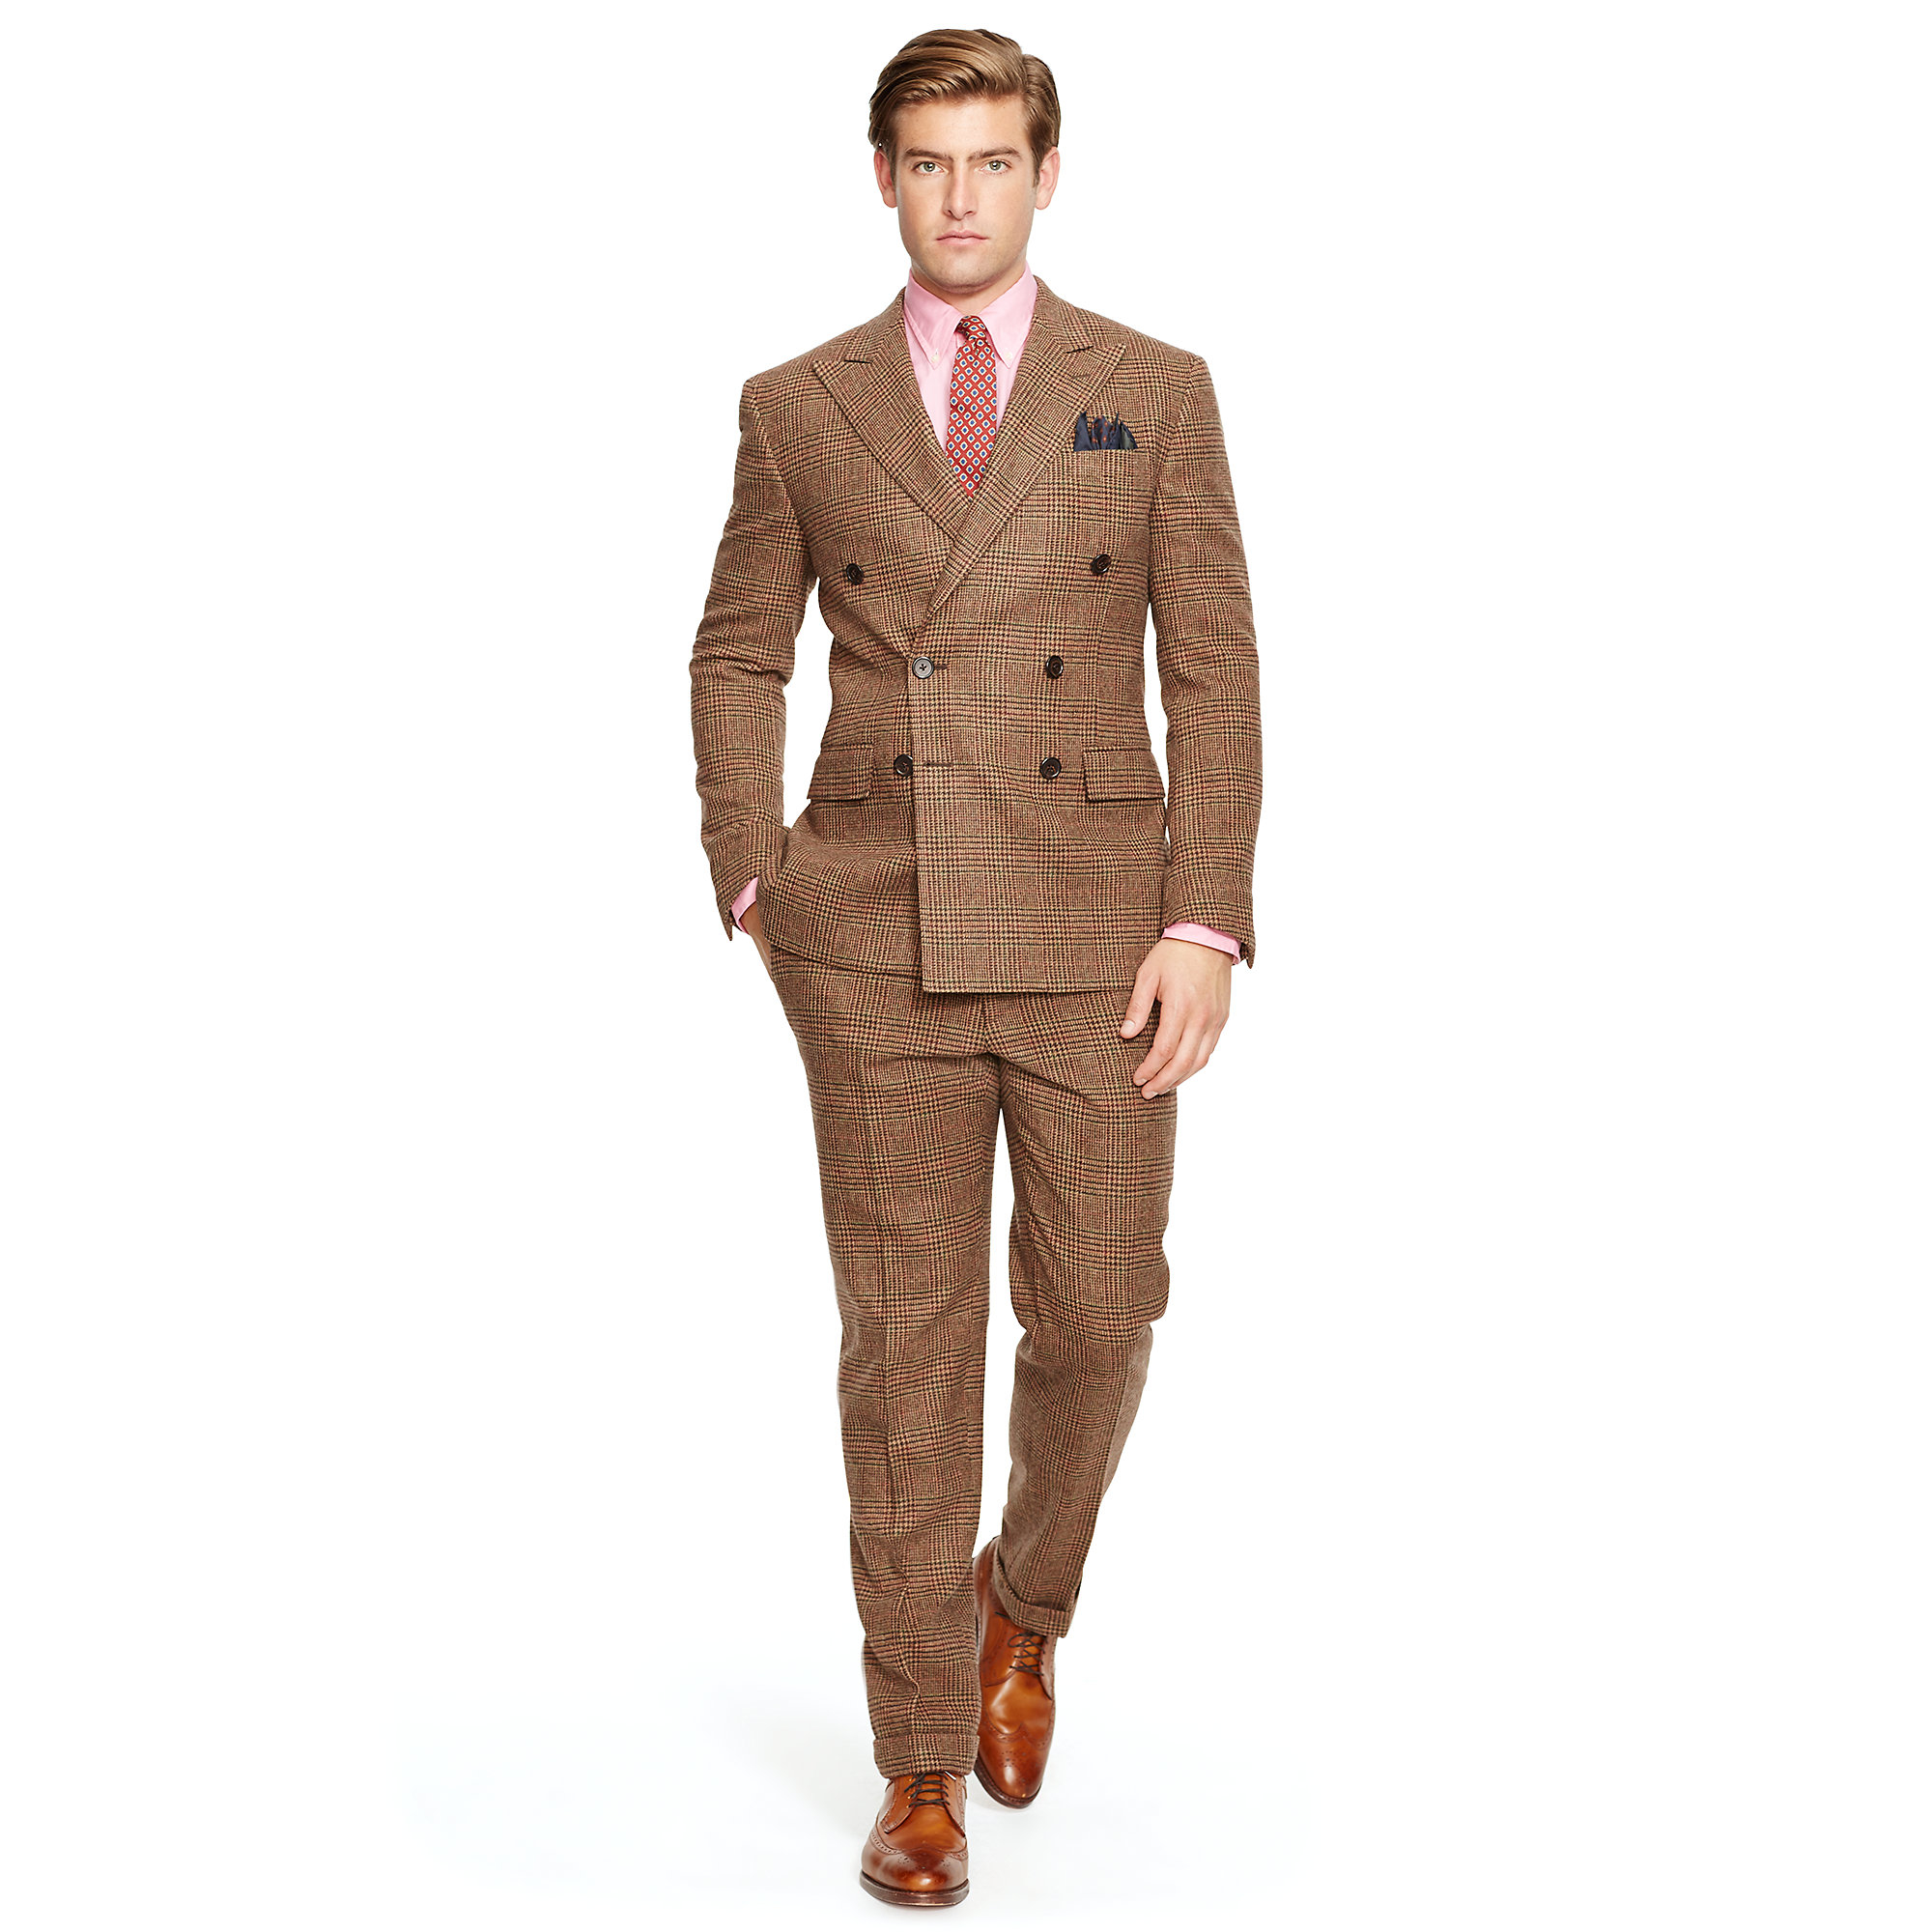 Lyst - Polo Ralph Lauren Polo Glen Plaid Db Wool Suit in Brown for Men